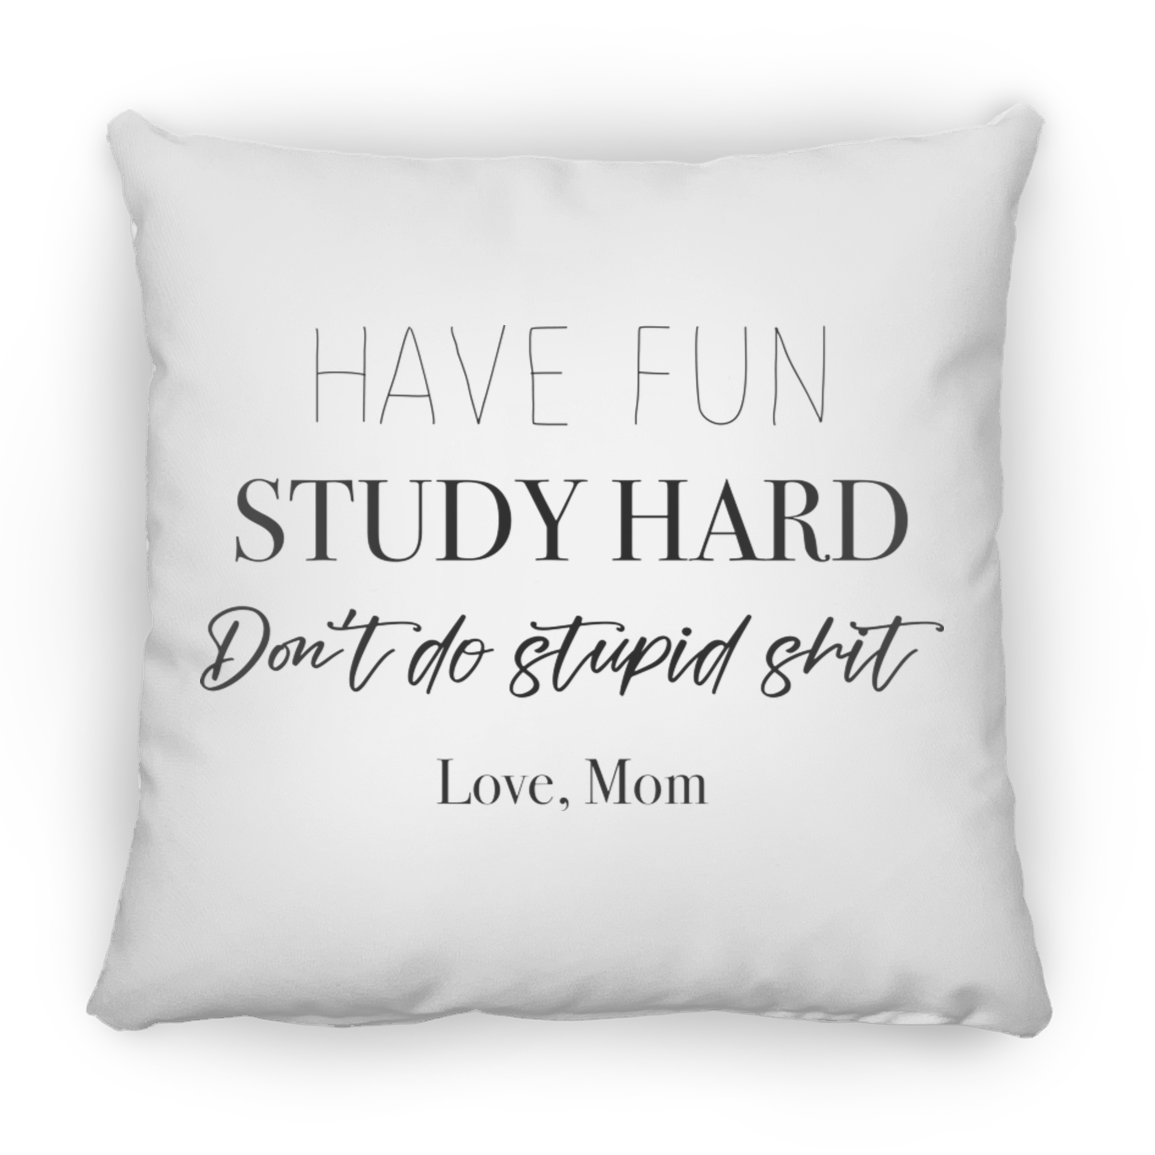 Don't Do Stupid Sh!t - Small Square Pillow